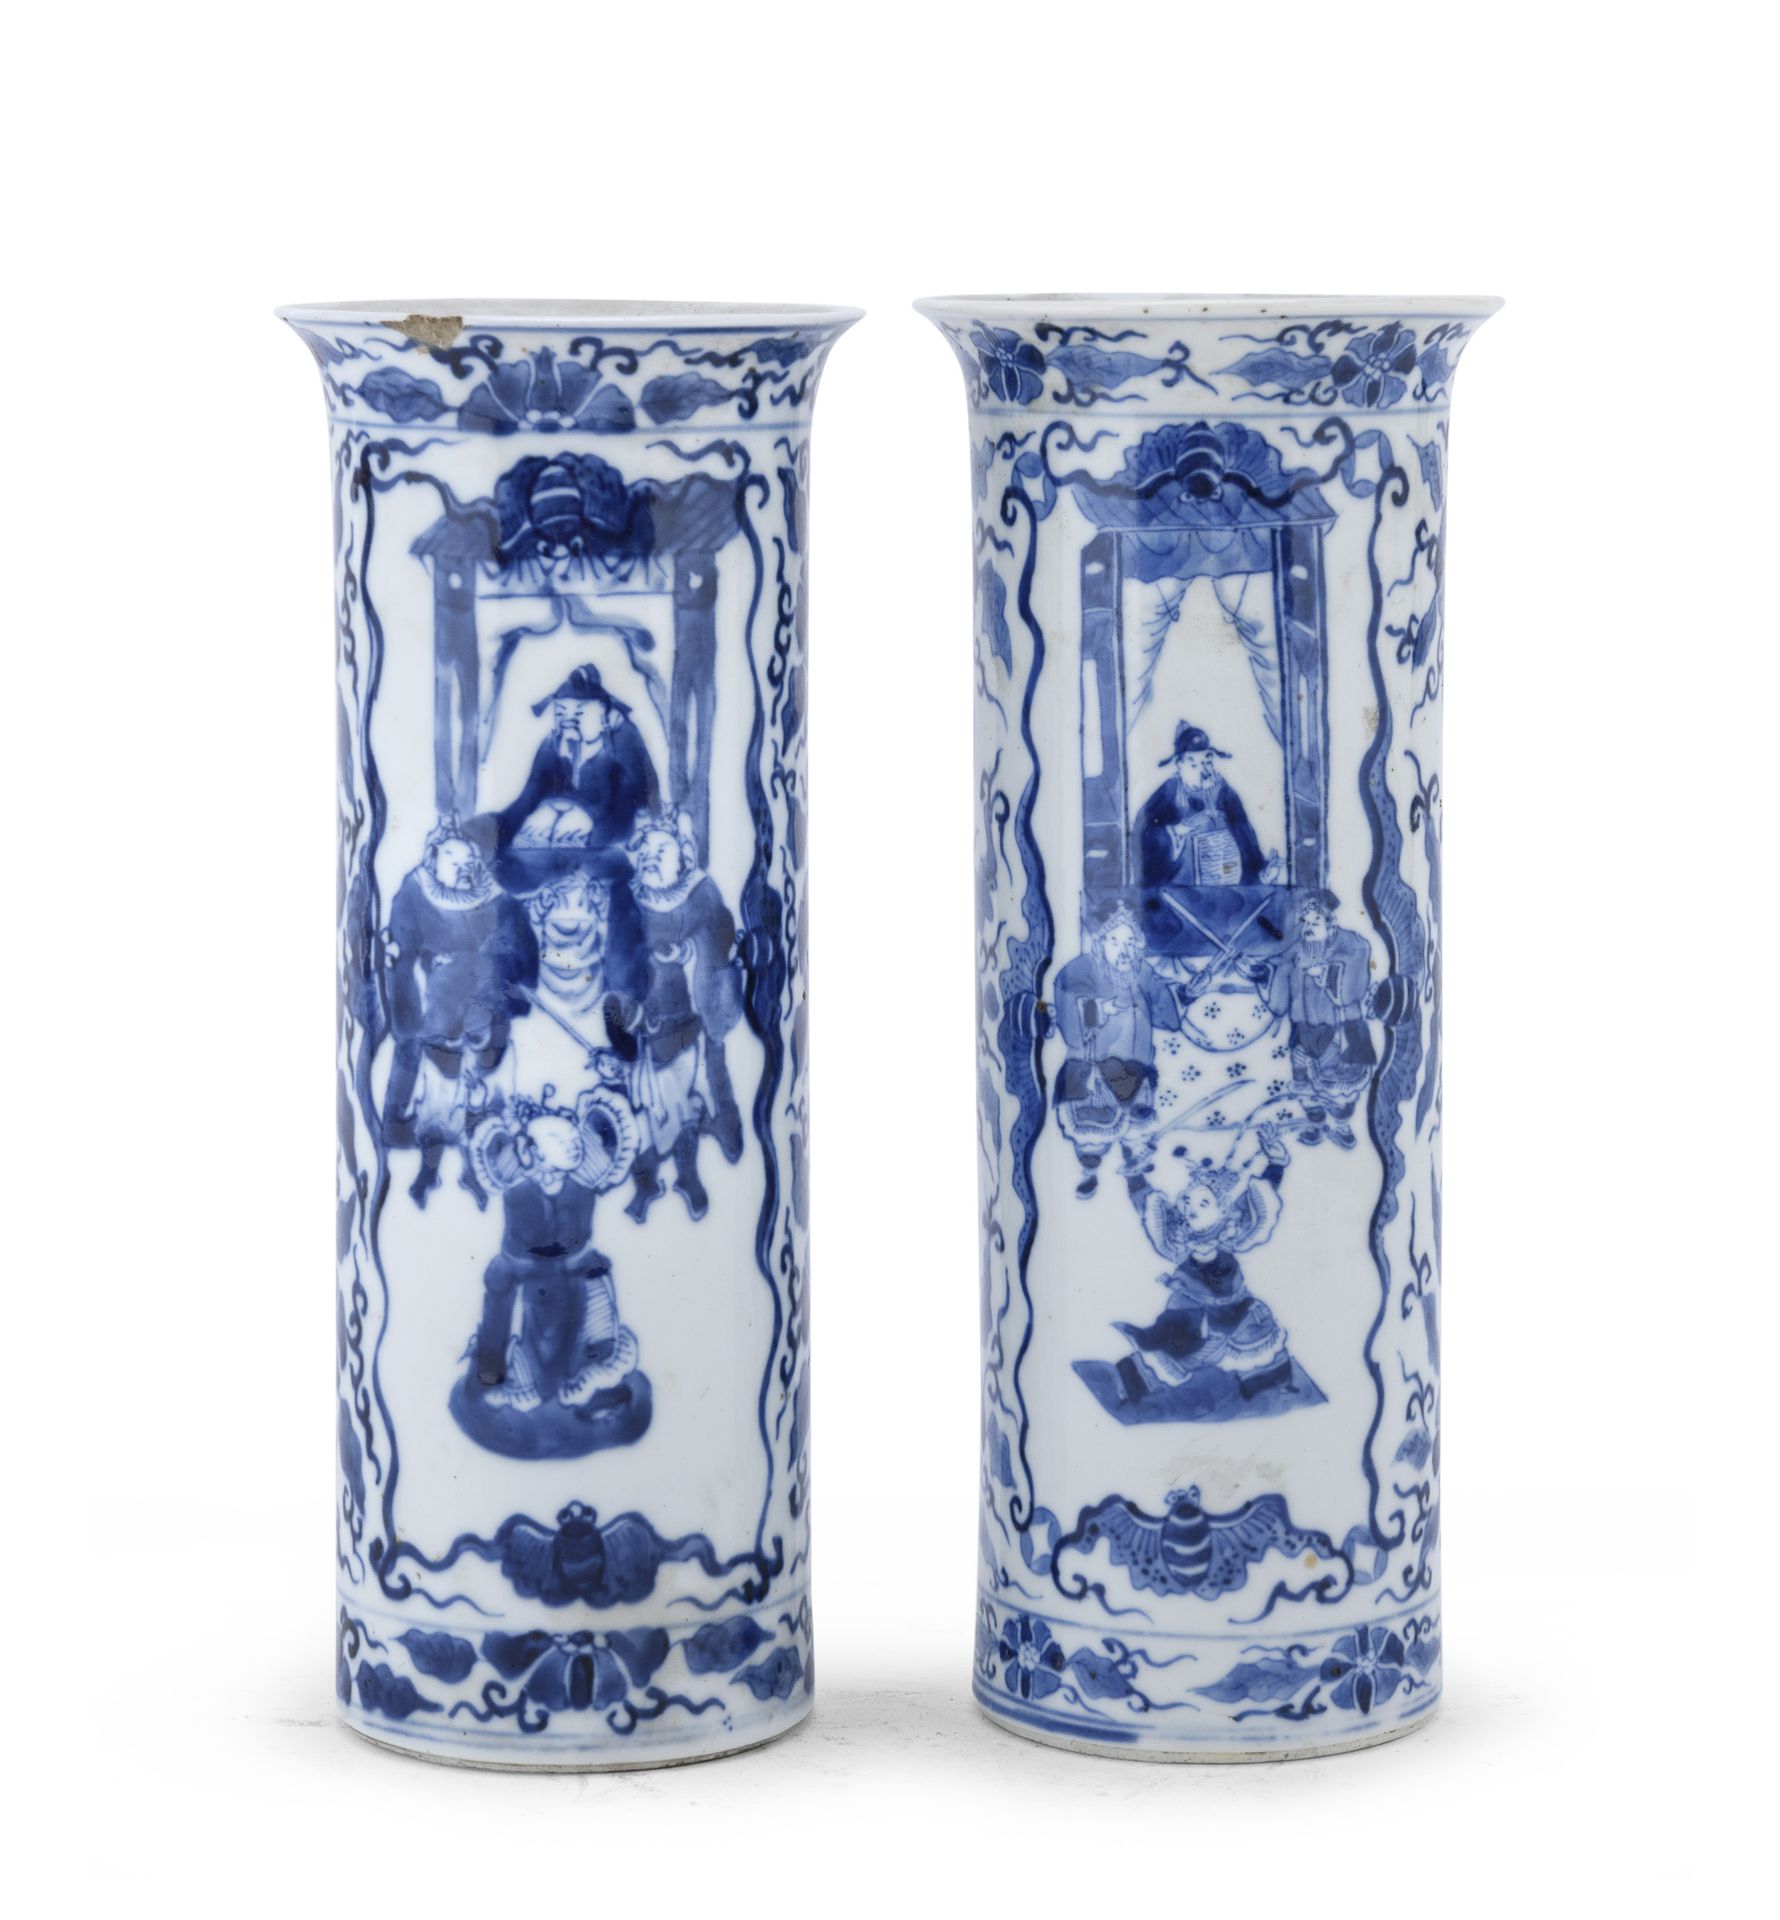 A PAIR OF CHINESE WHITE AND BLUE PORCELAIN VASES FIRST HALF 20TH CENTURY.